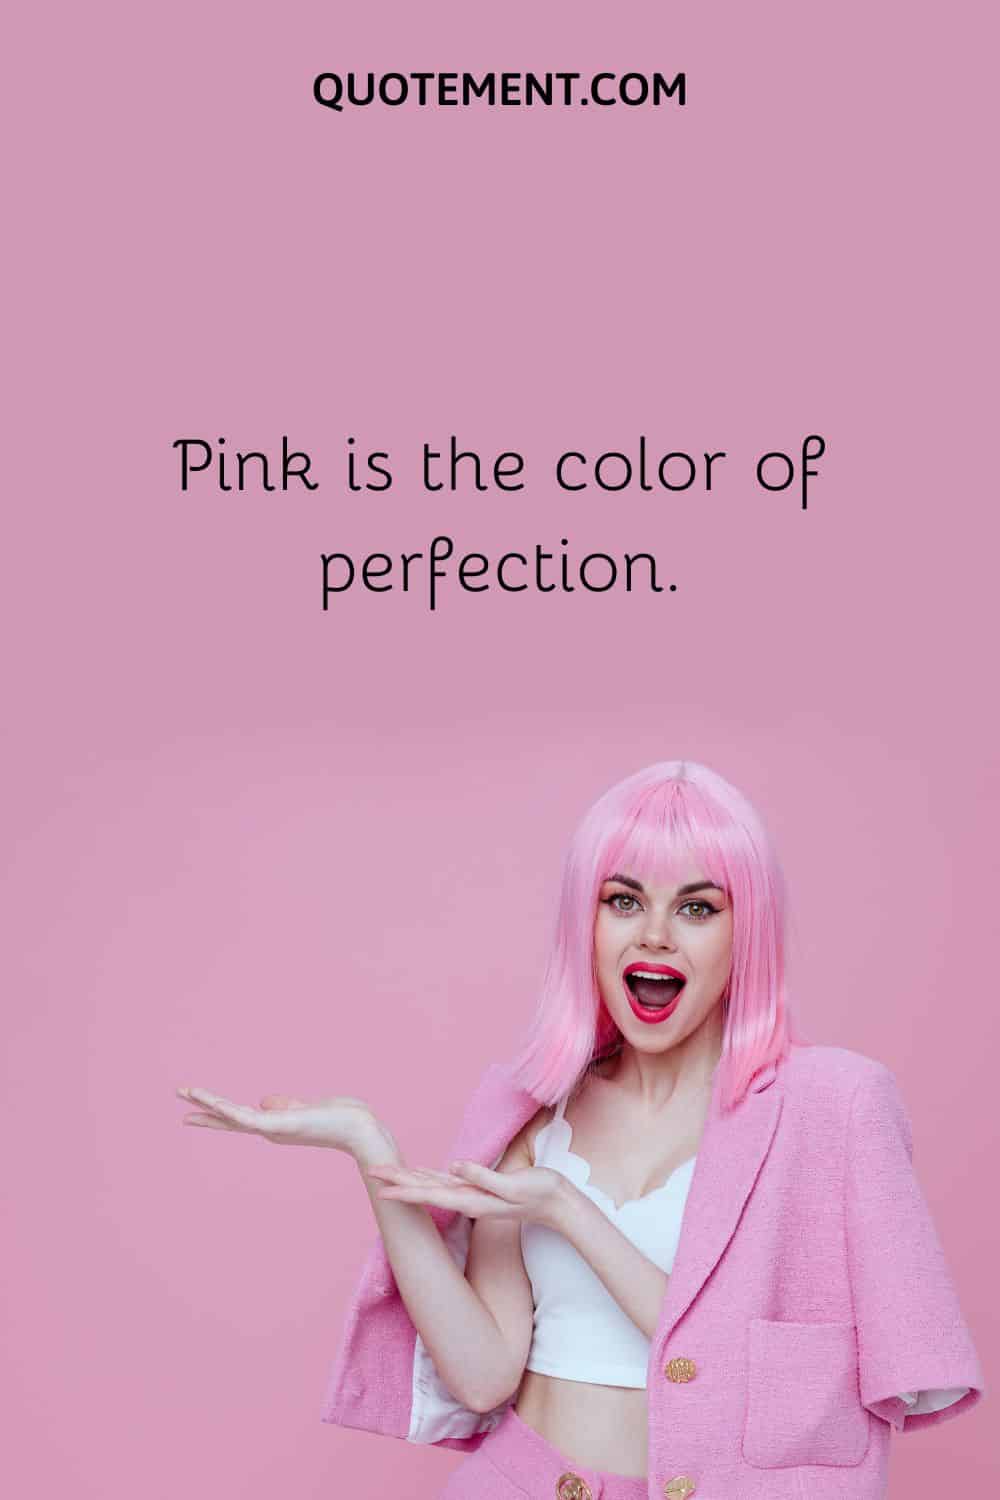  ‍Pink is the color of perfection.
